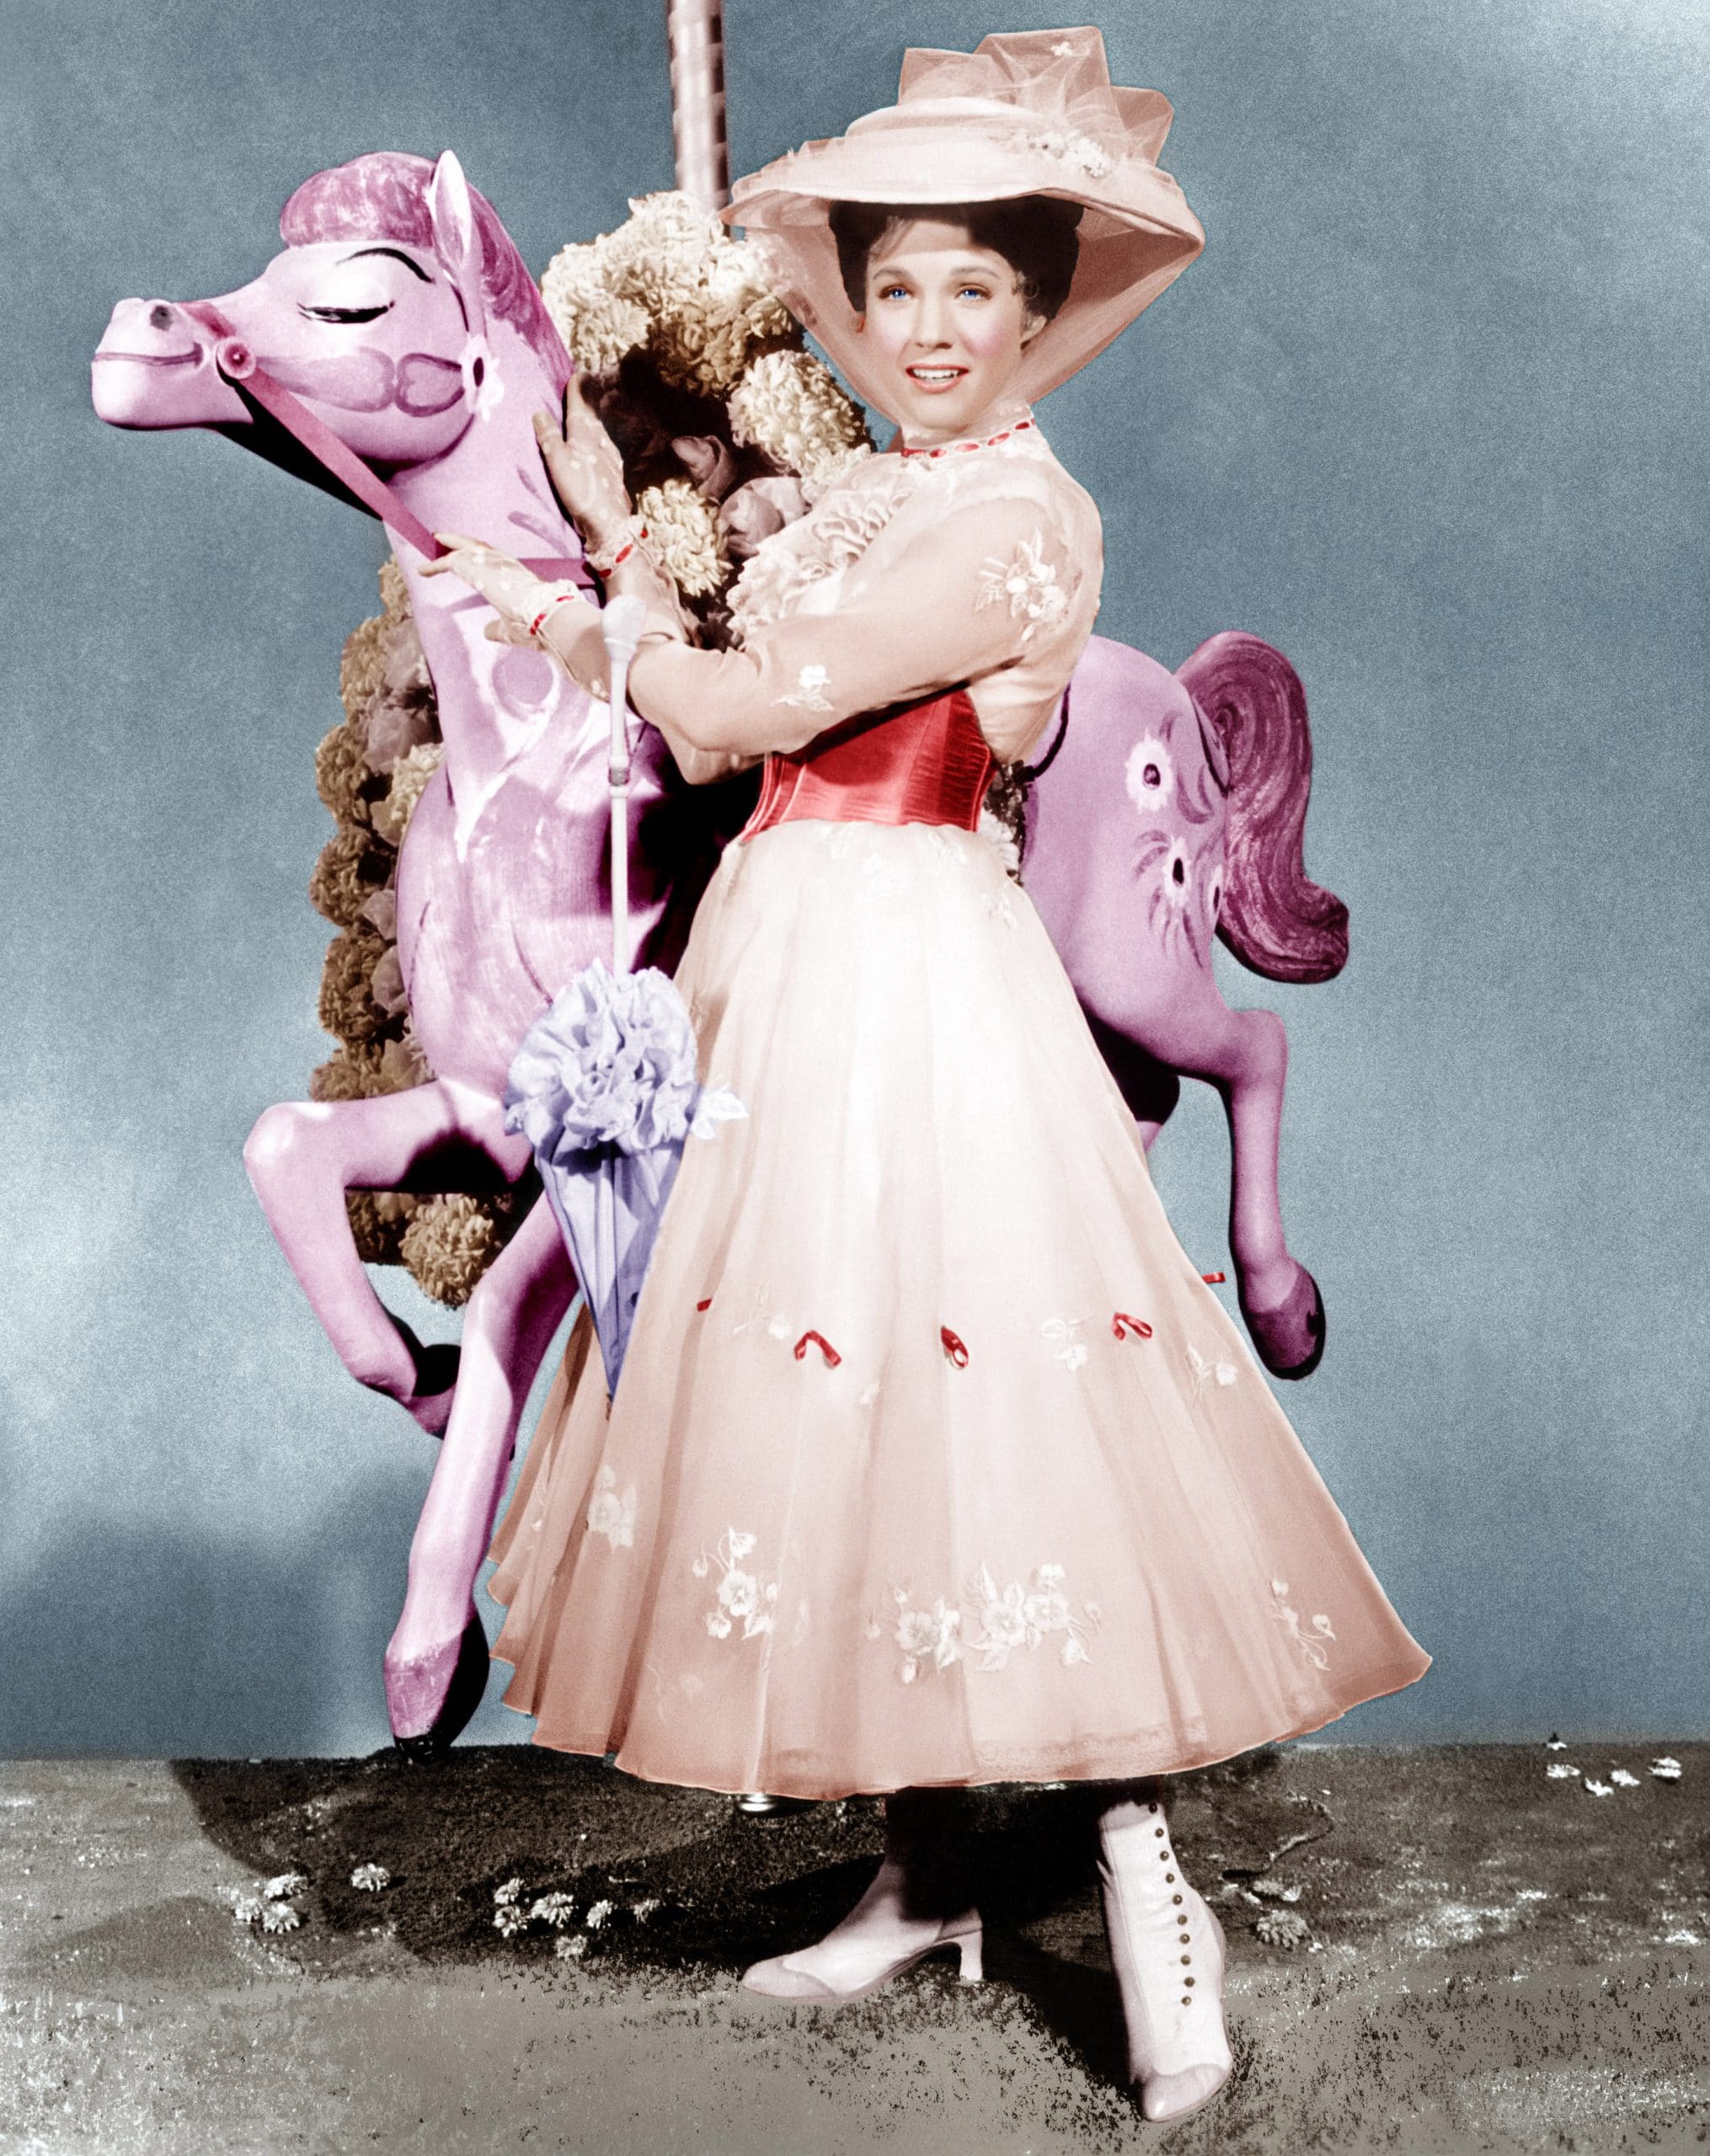 julie andrews as mary poppins